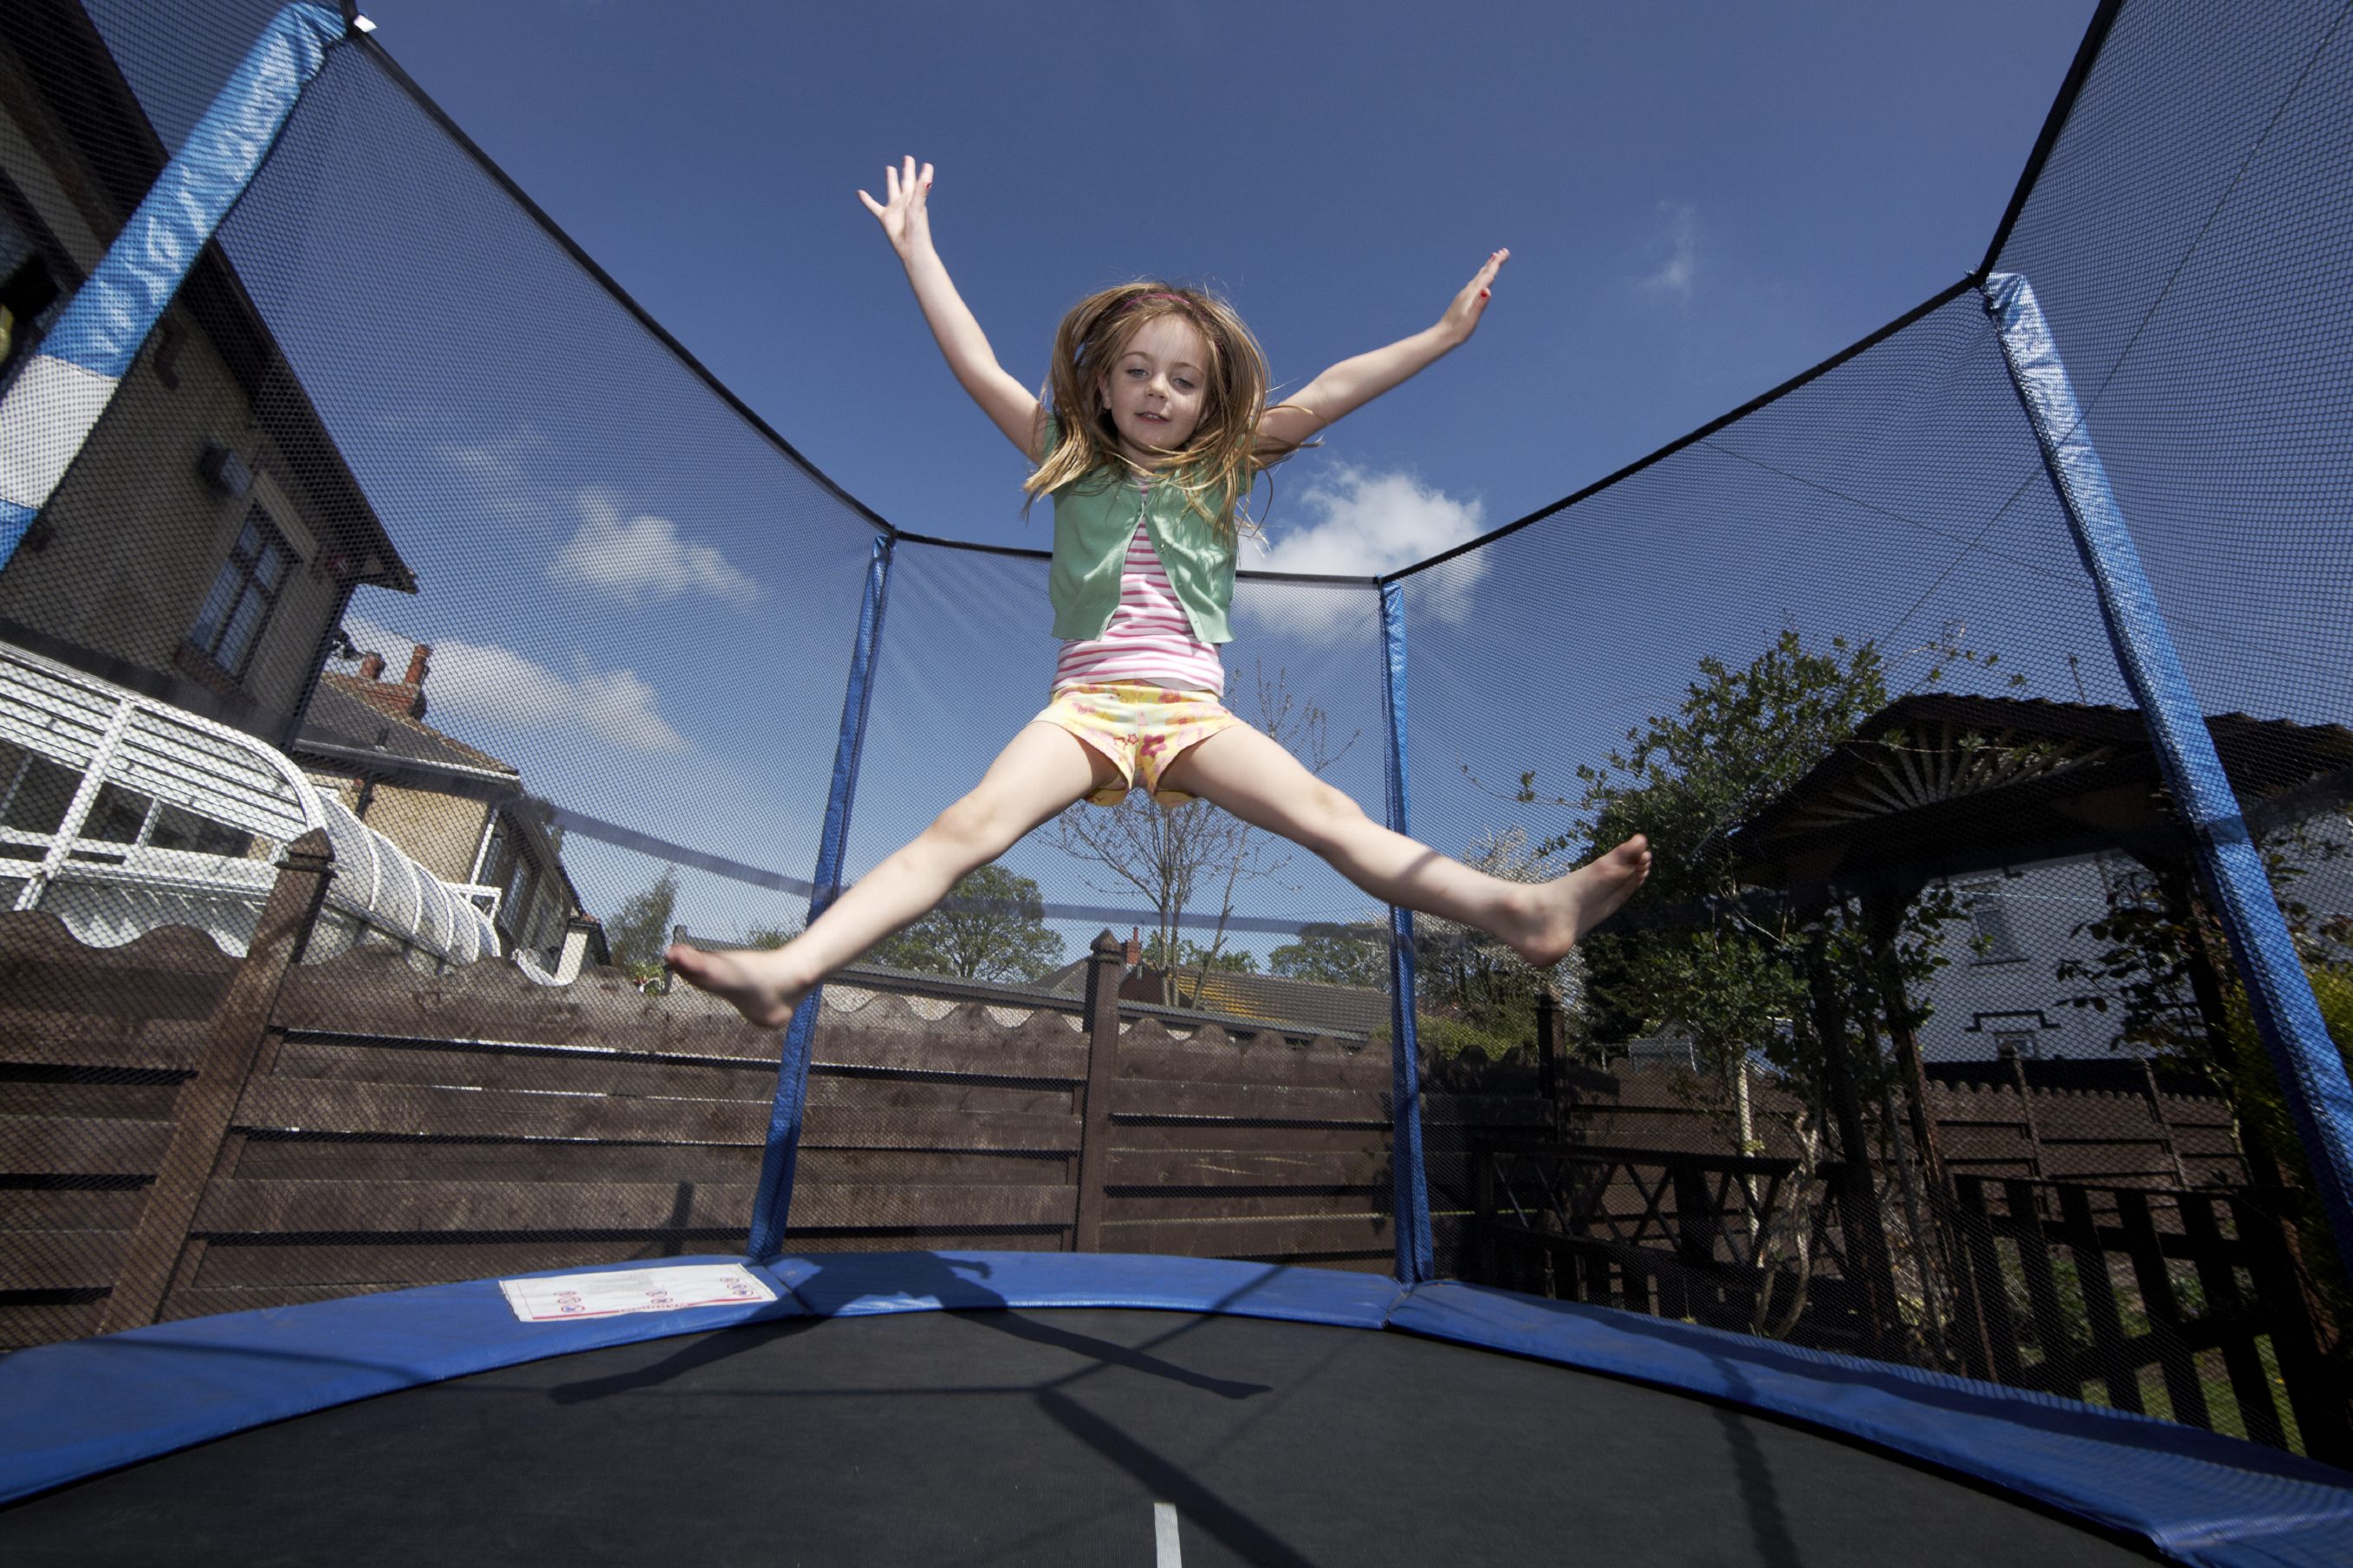 girl playing in trampoline